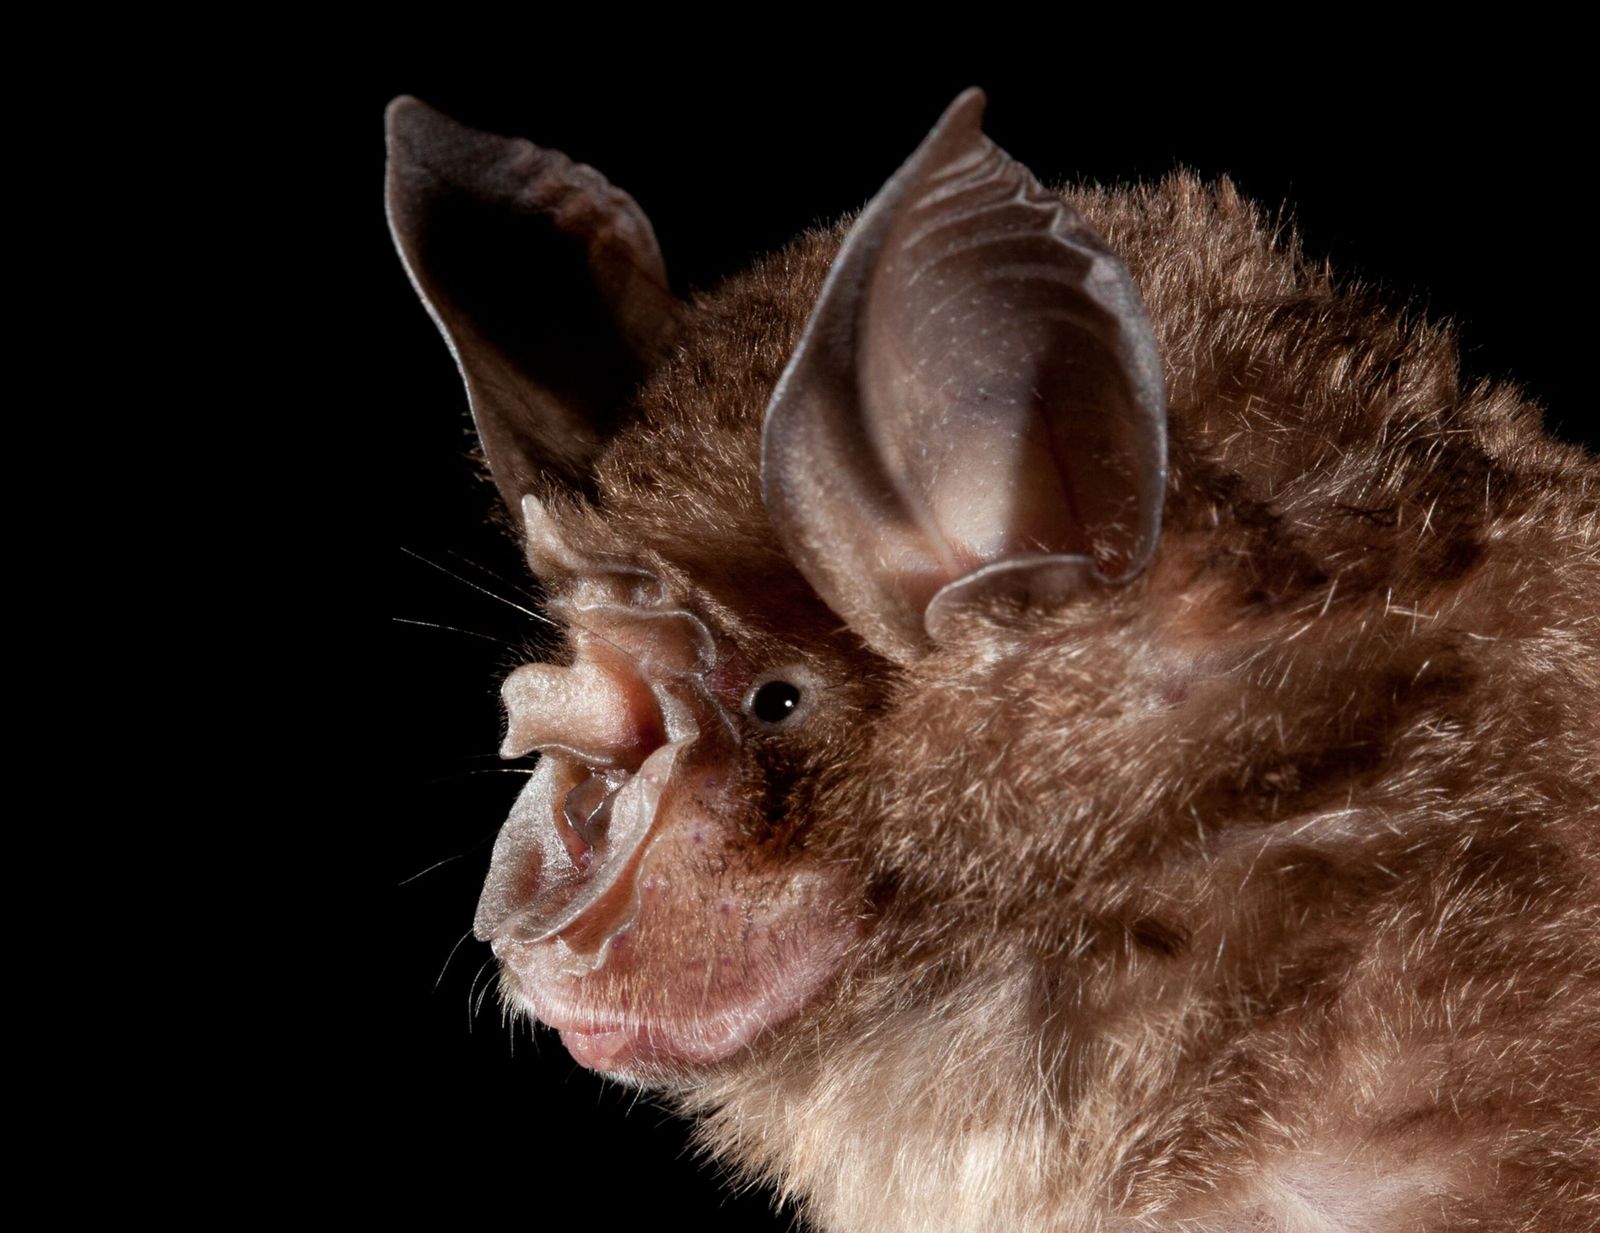 Humans create hotspots where bats can transmit zoonotic diseases